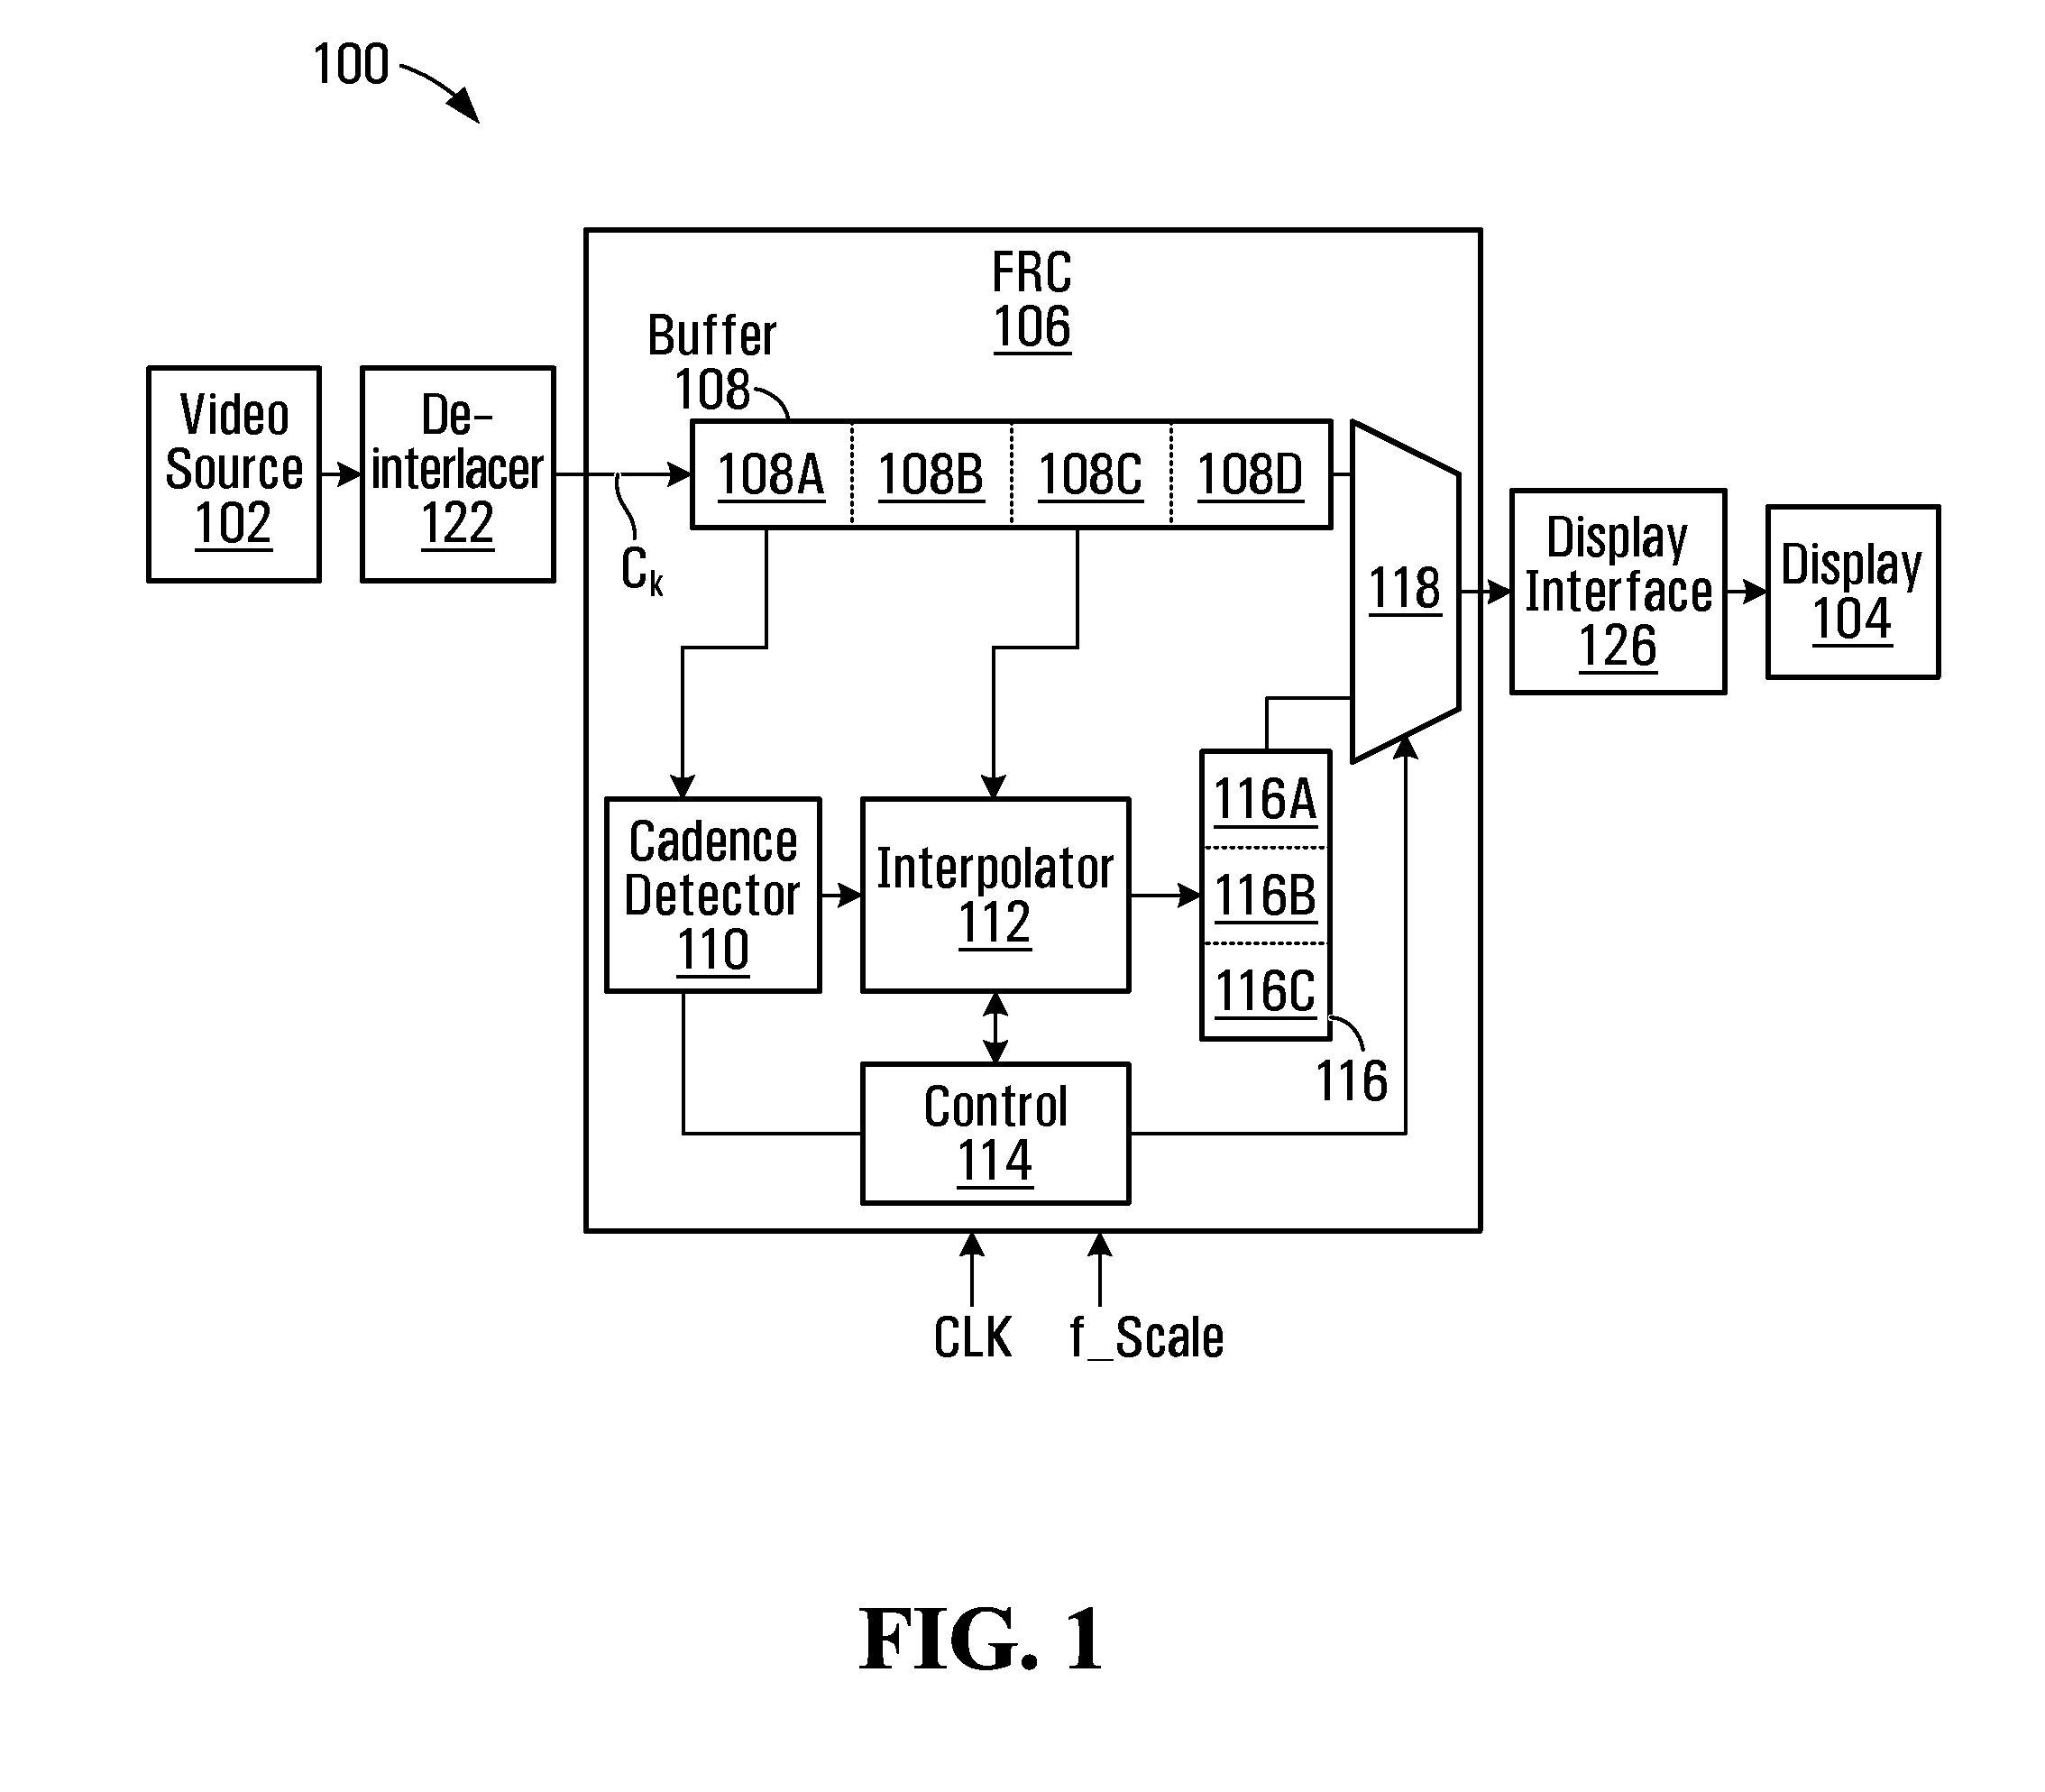 Frame rate converter for input frames with video and film content